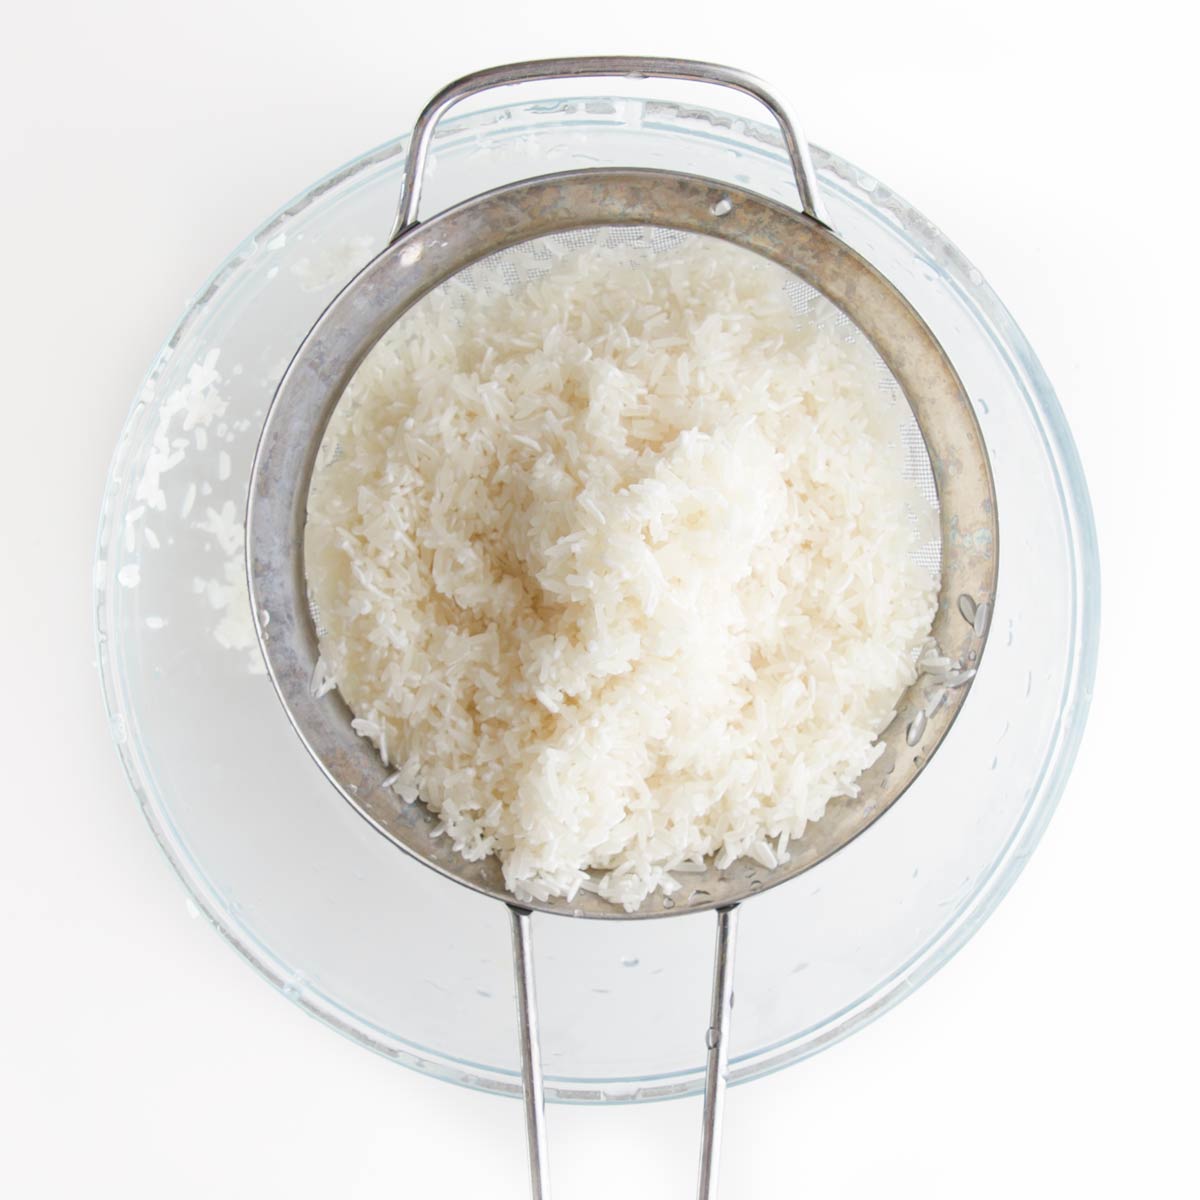 Washed Jasmine Rice in Sieve Over Glass Bowl.